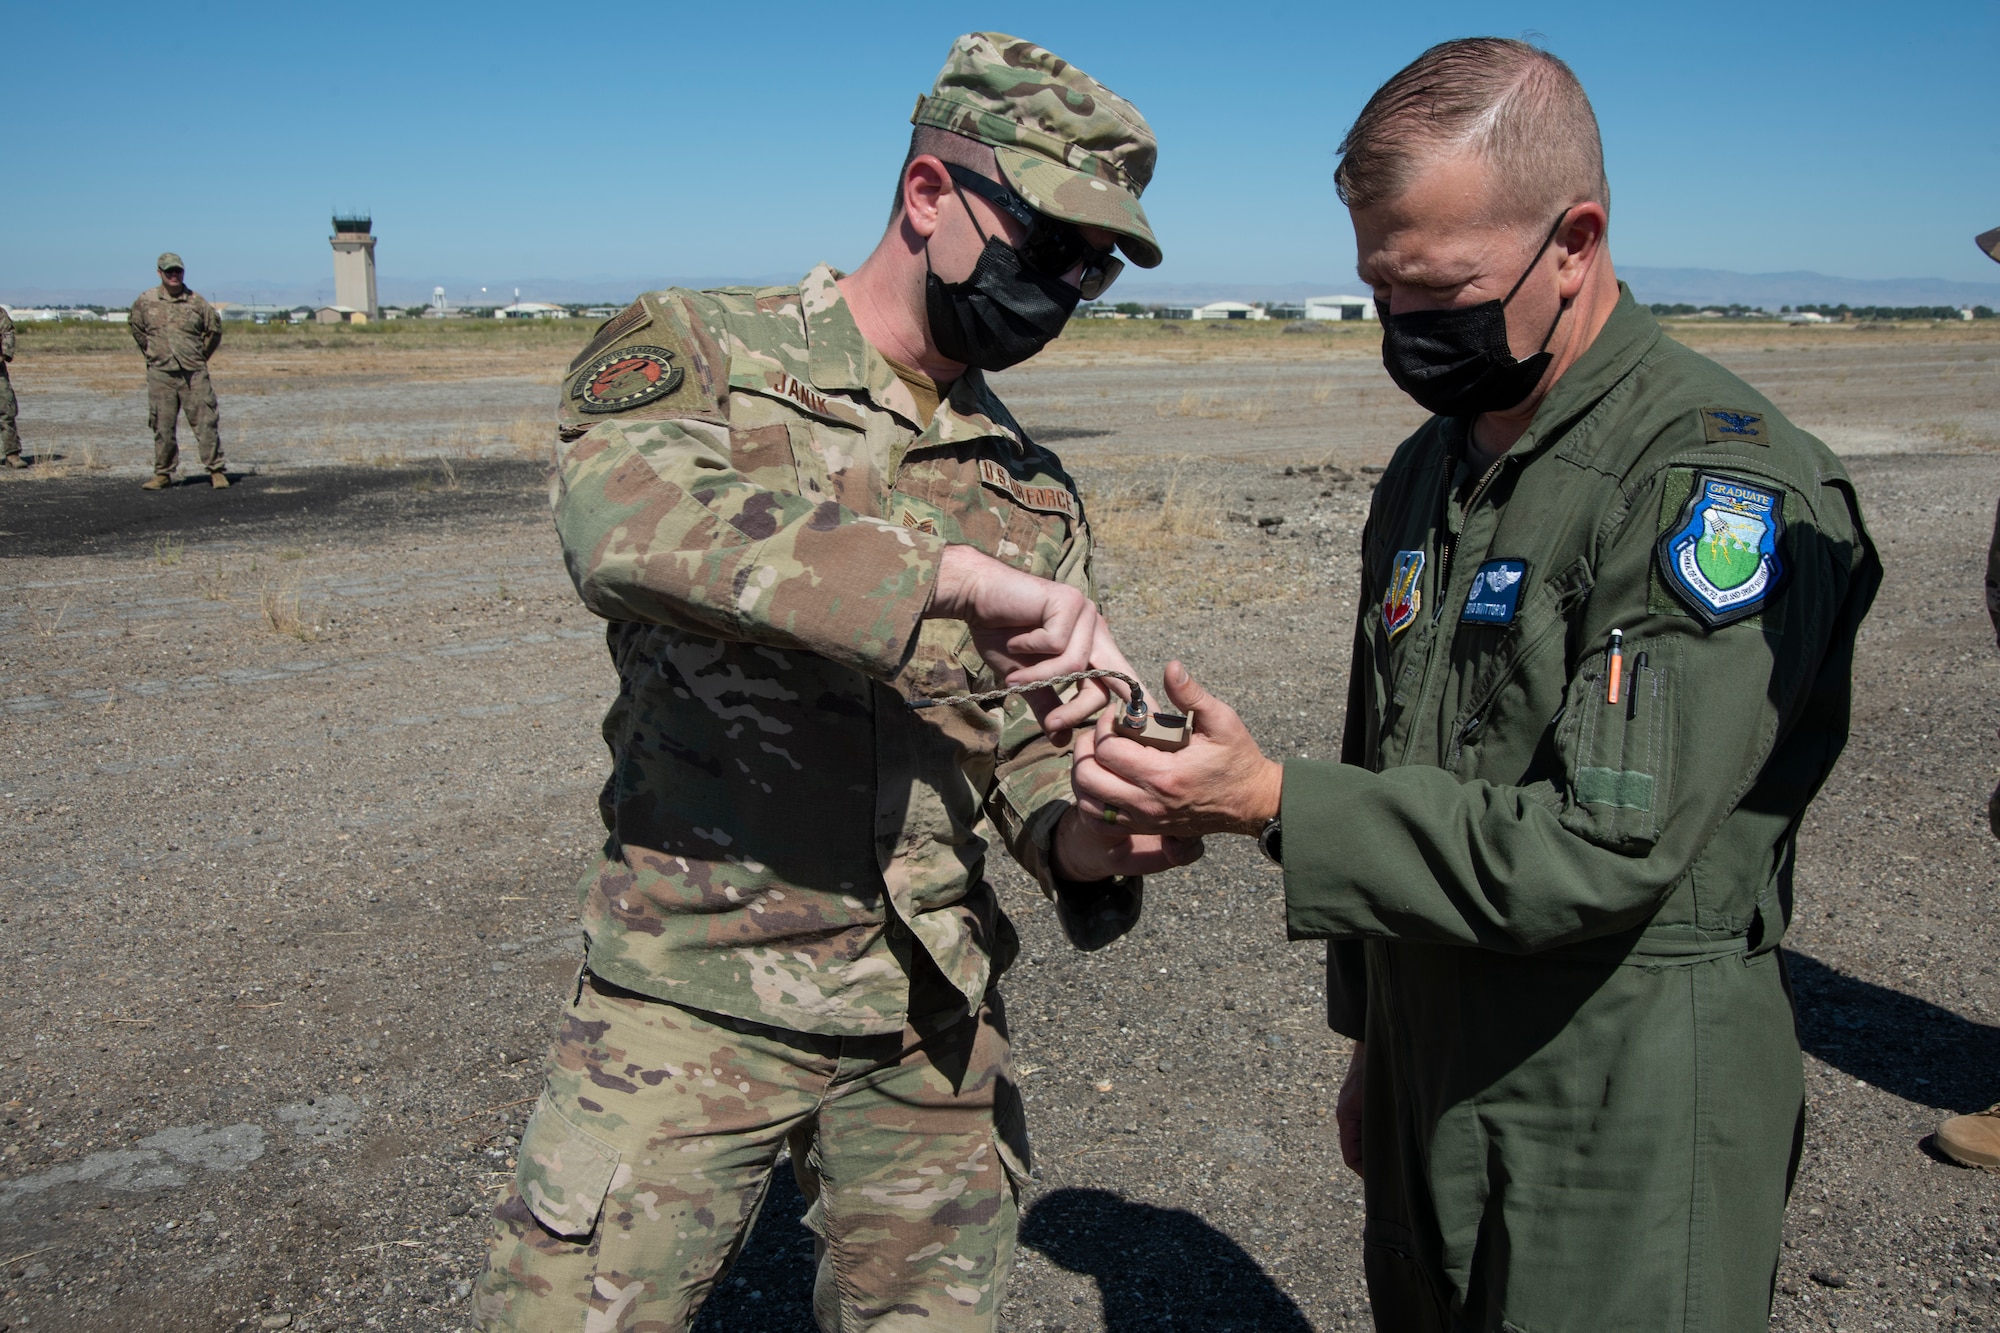 An Airman shows the colonel how to operate a detonator.